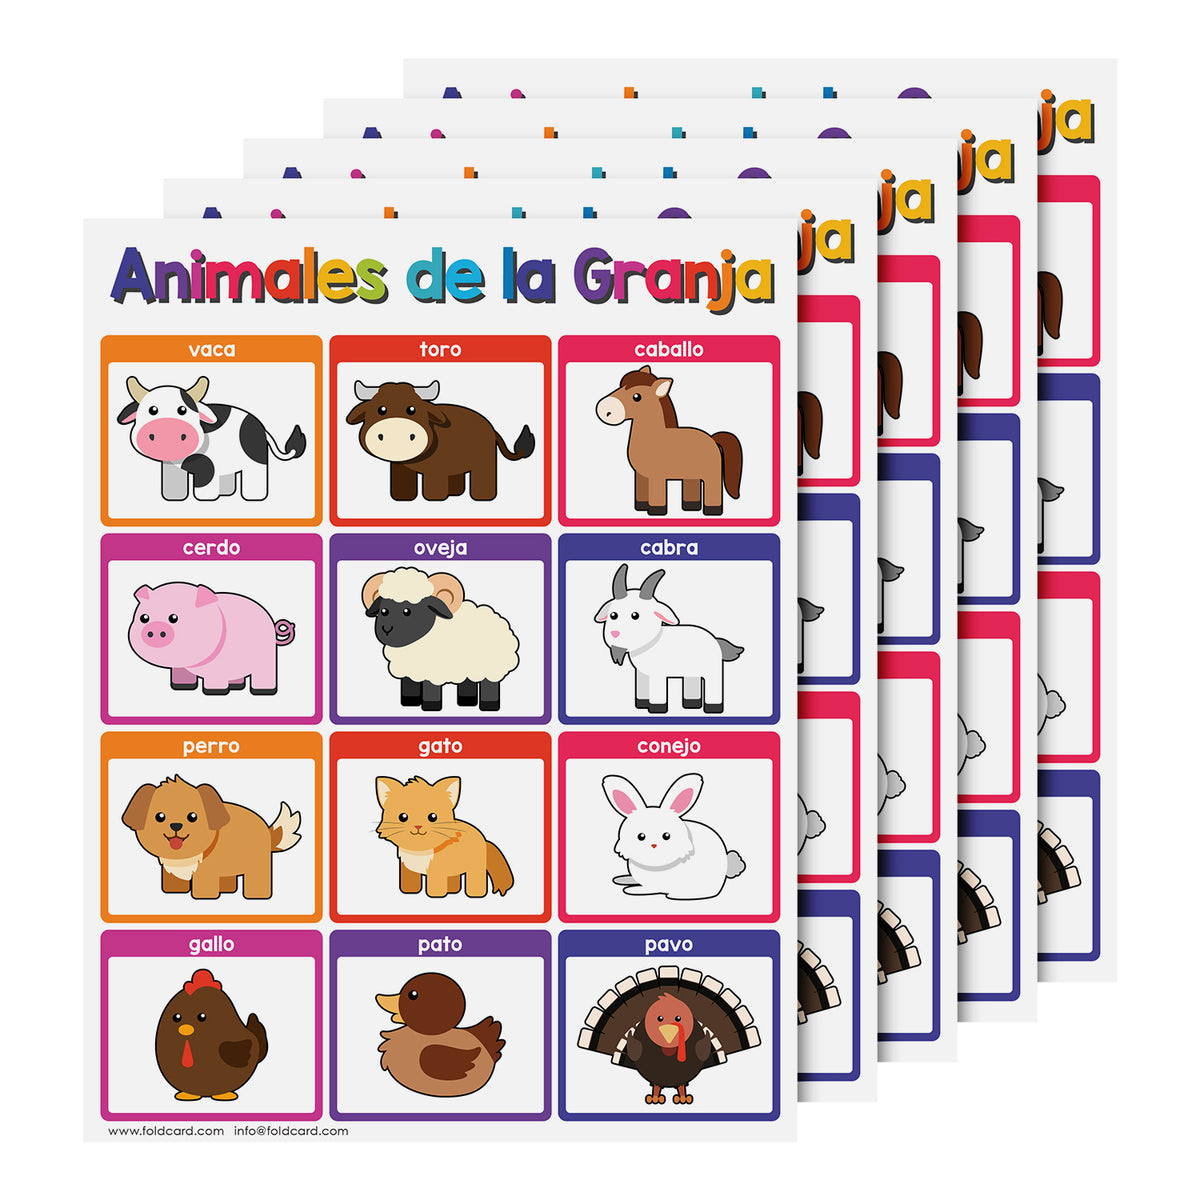 Farm Animals Spanish Chart for Kids | Bright and Colorful Educational Poster | 8.5" x 11" | 5 Pack